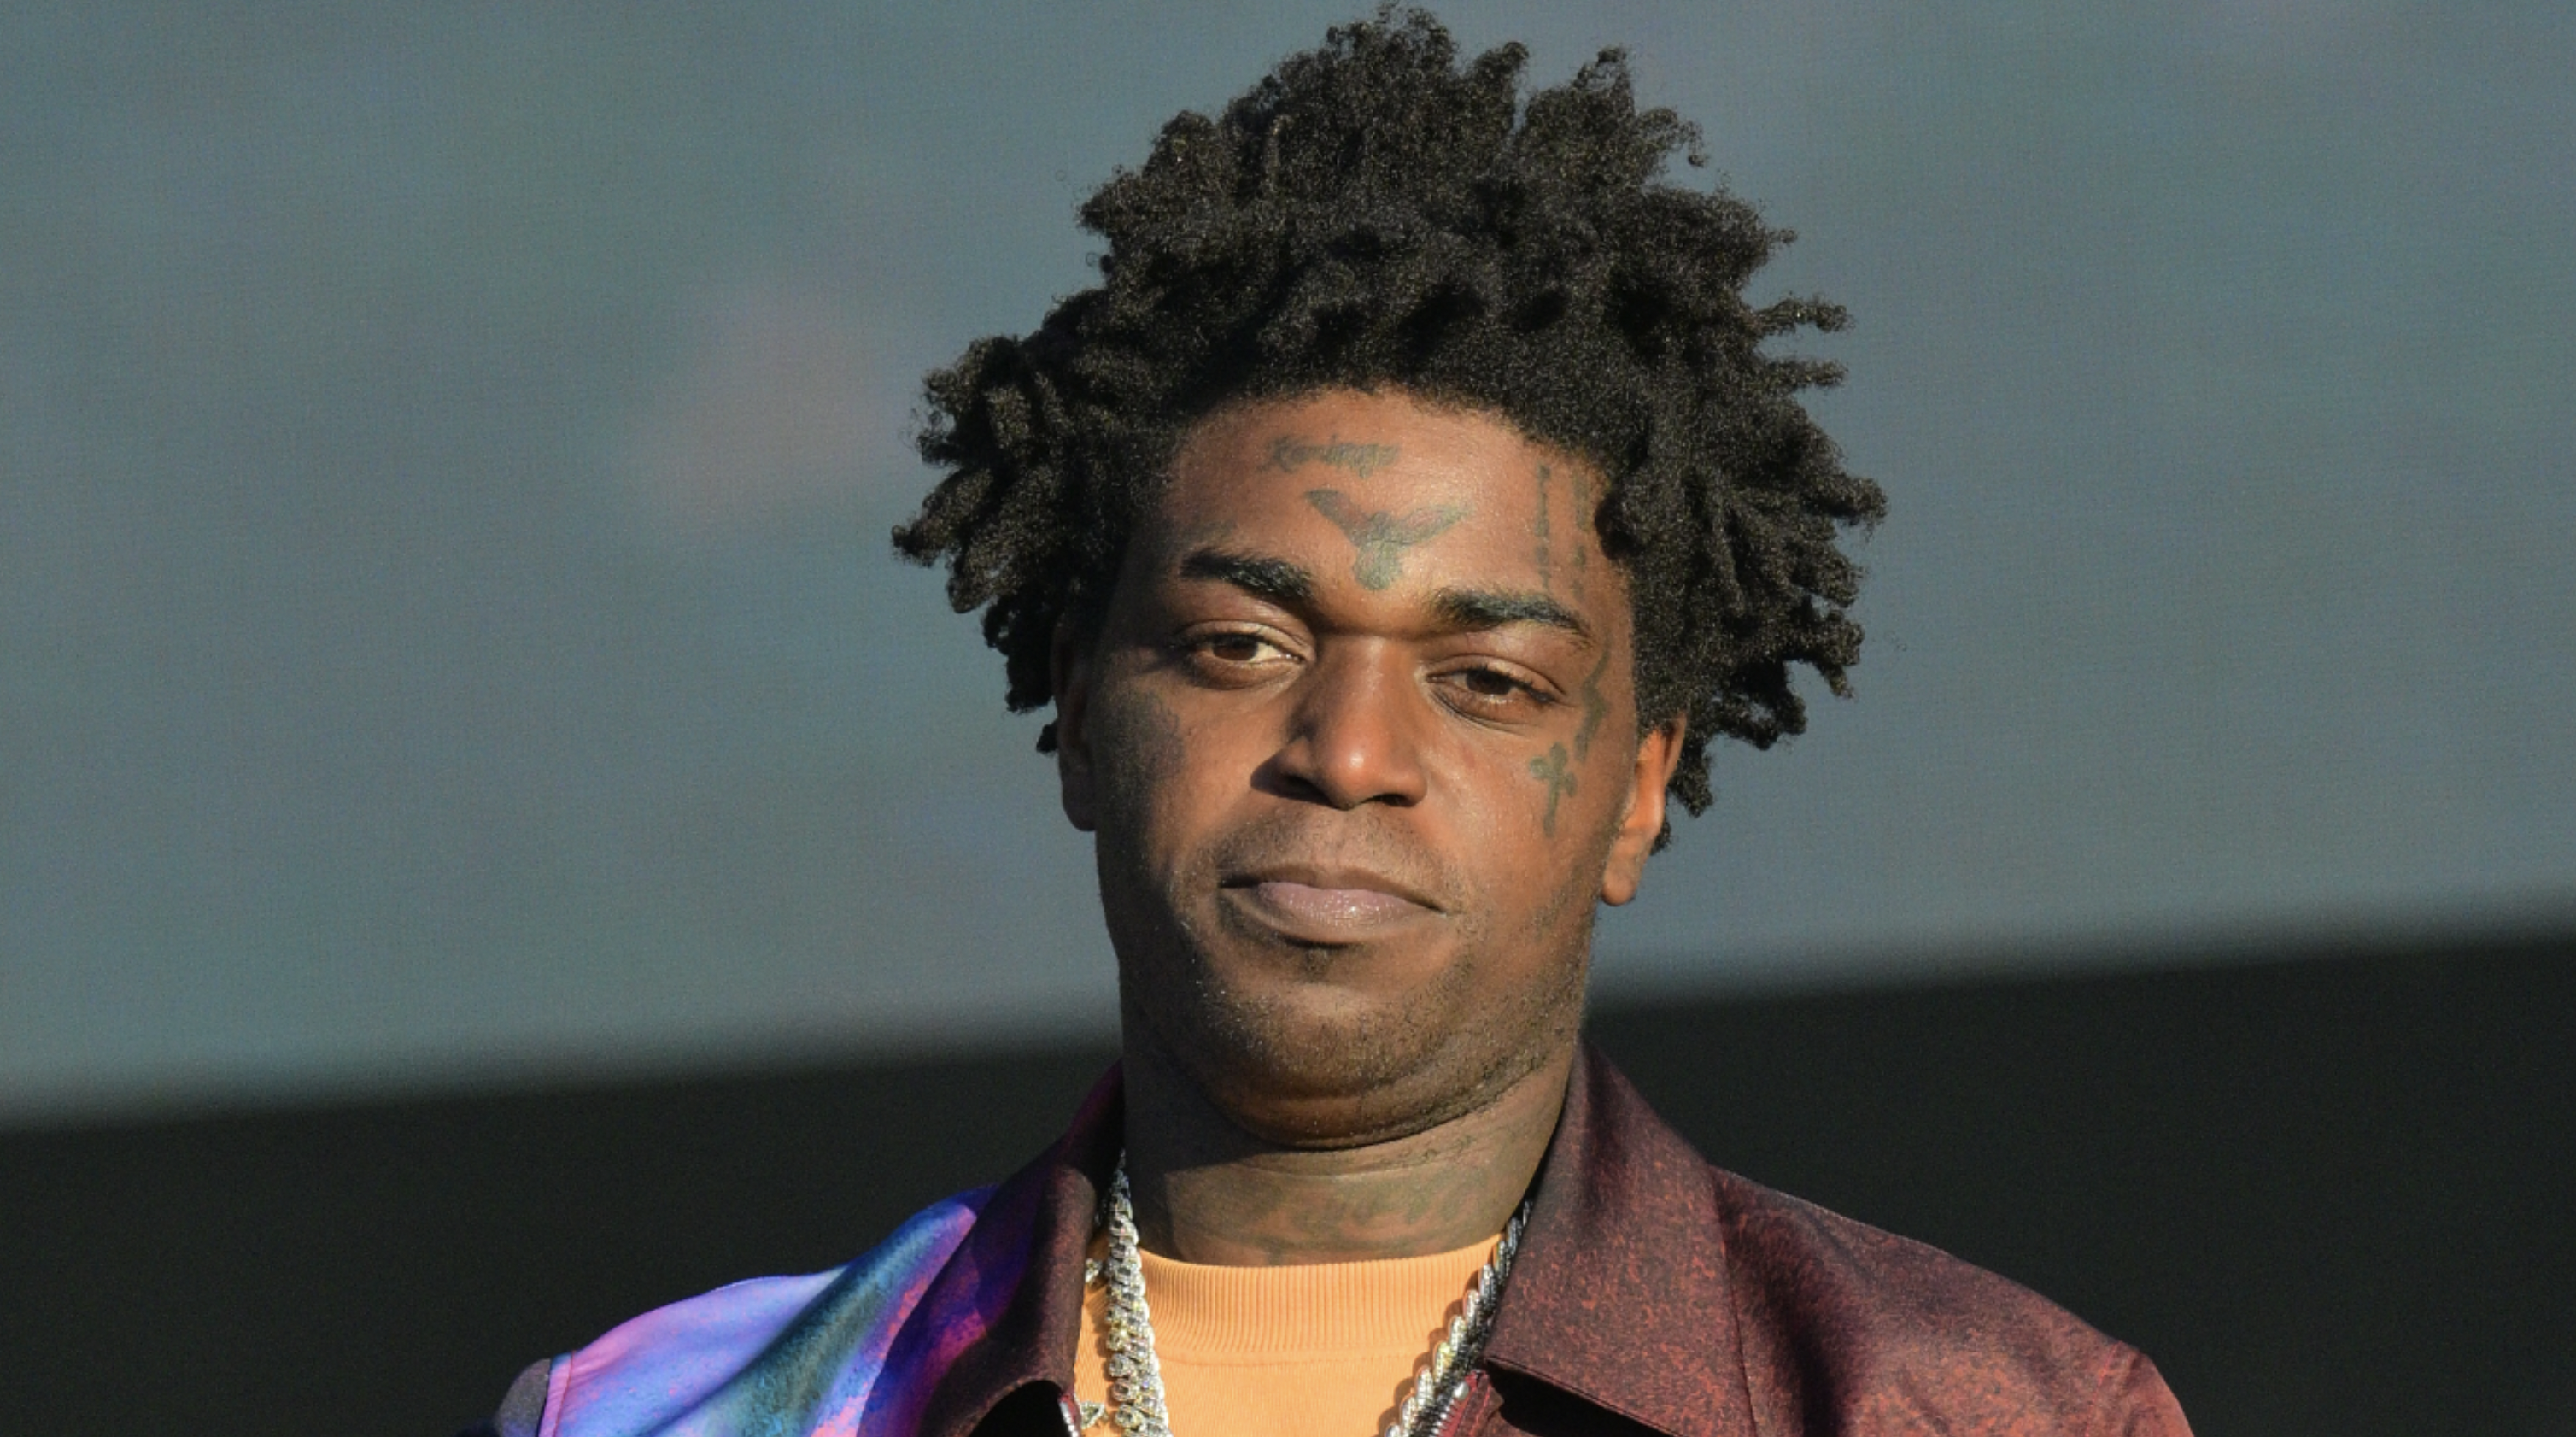 Not In A Good Mood! Kodak Black Throws Rocks At Reporter Following His Release From Jail